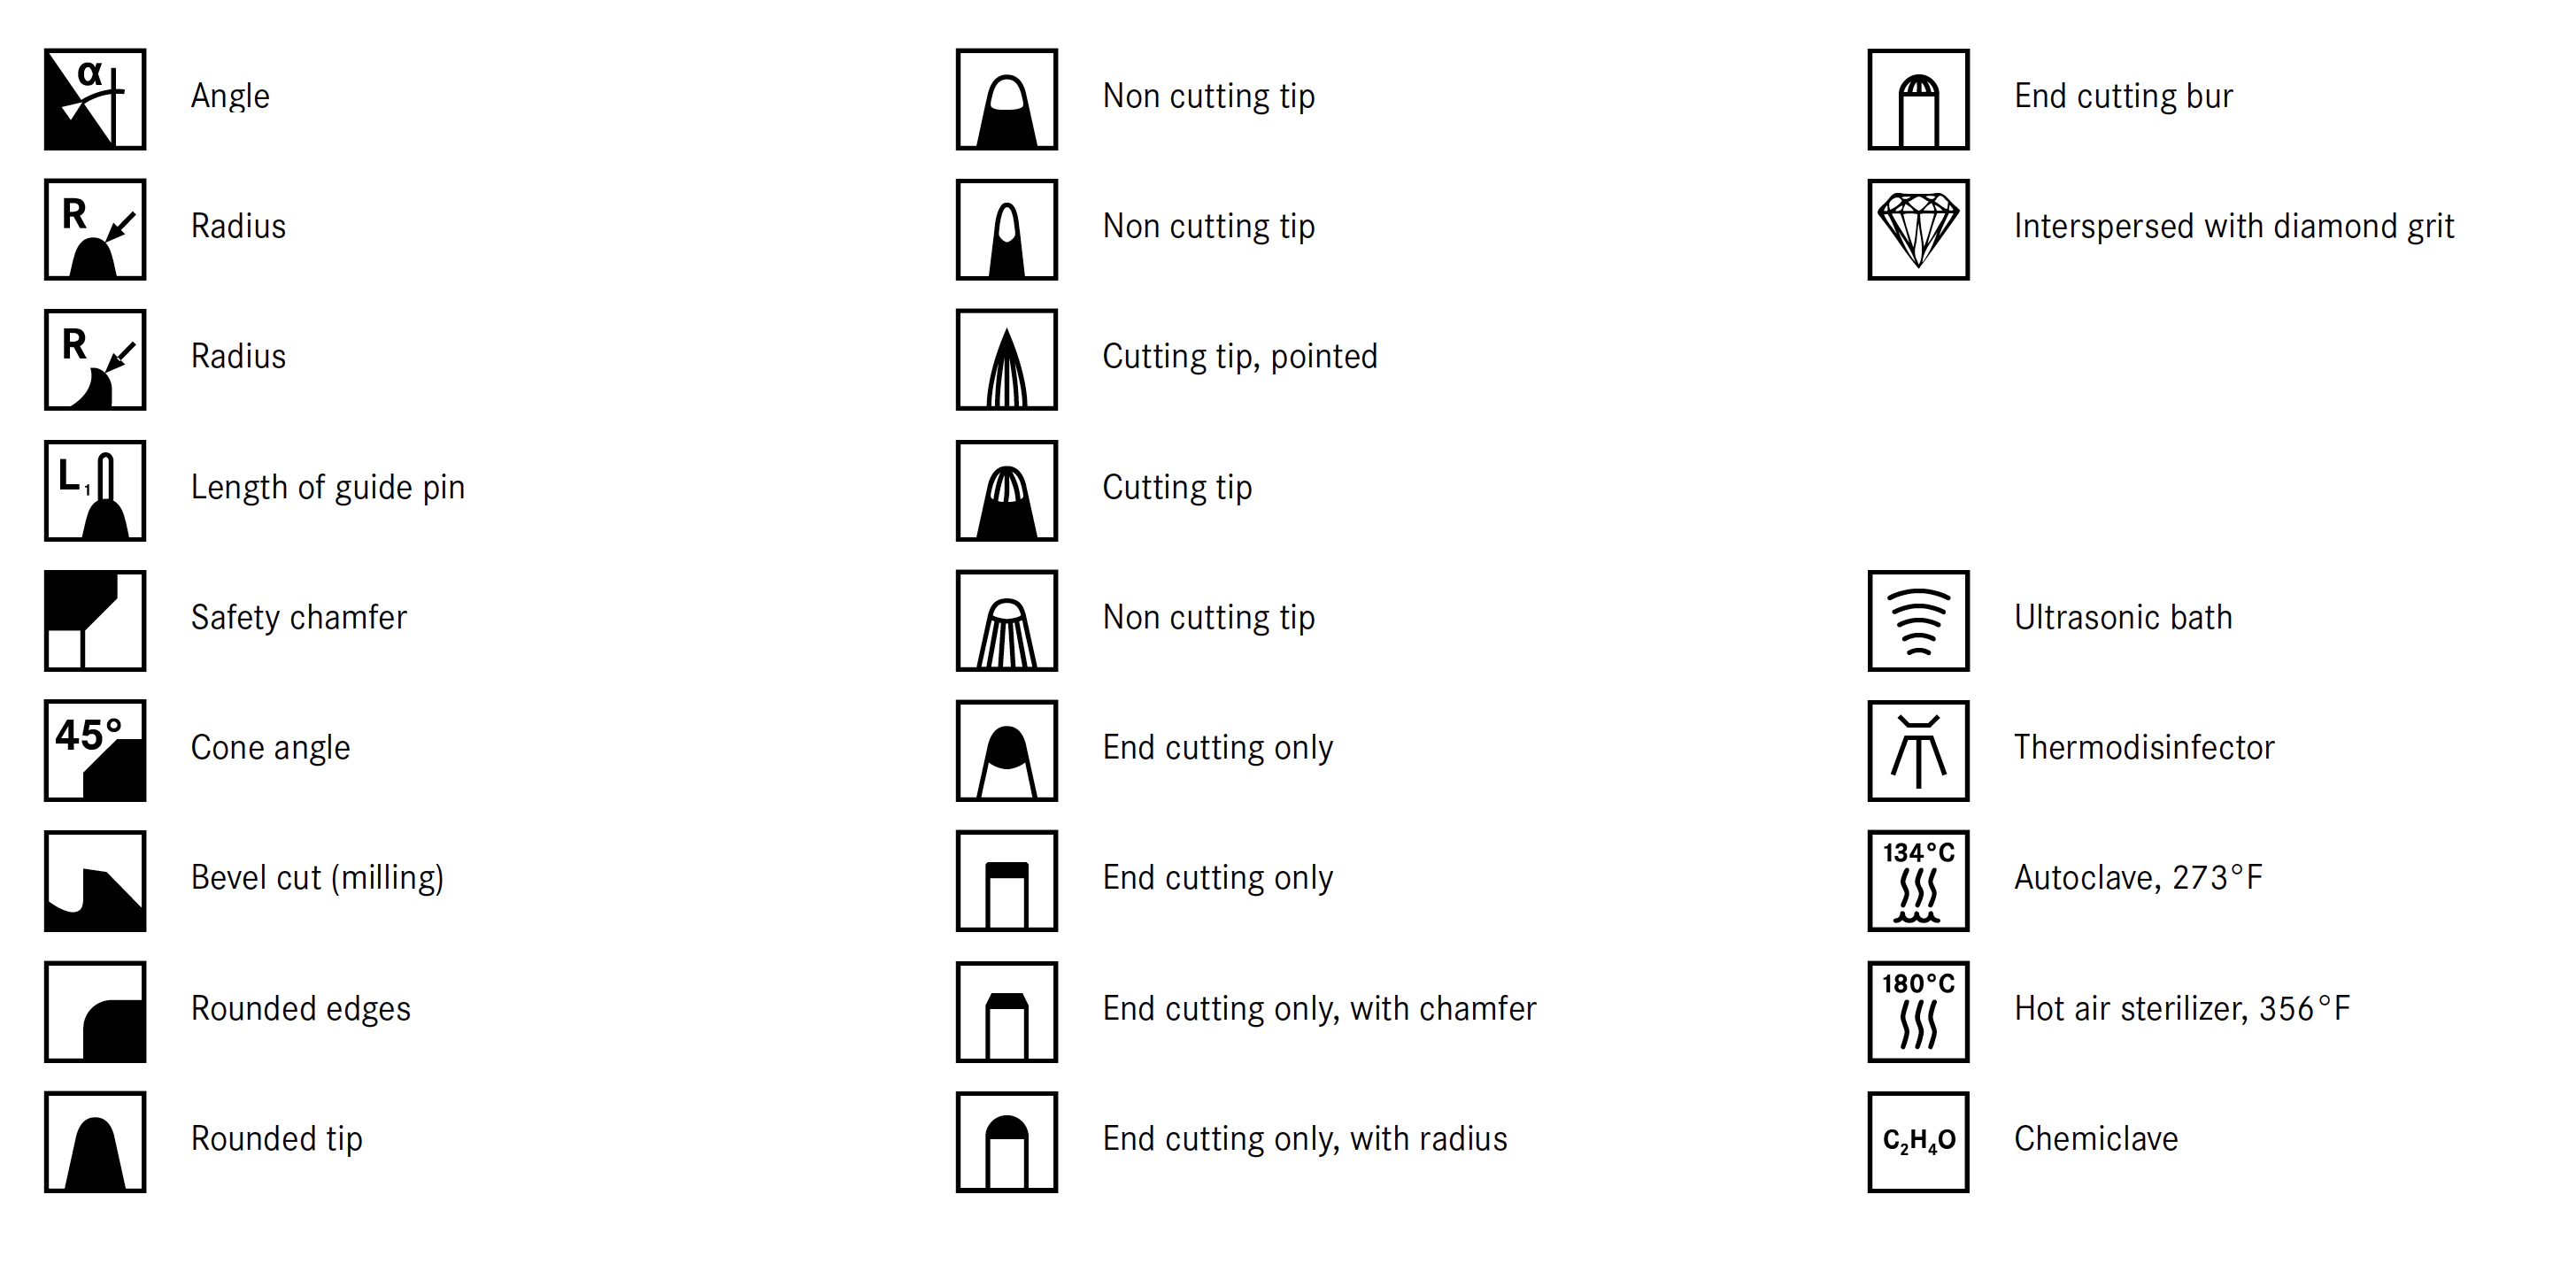 komet packaging icons indicating technical information and reprocessing recommendations